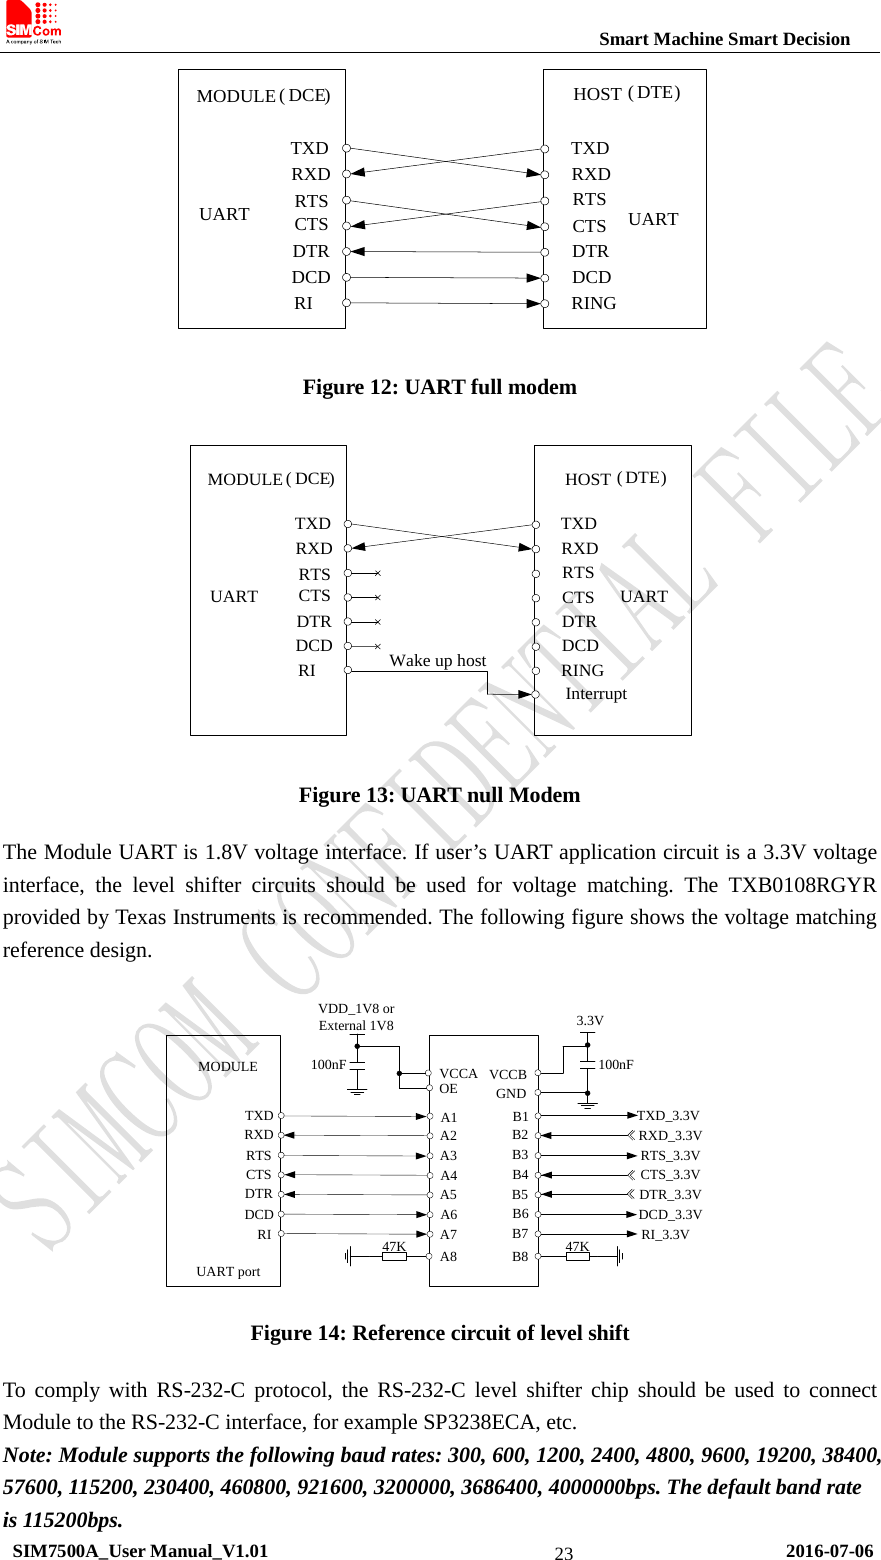                                                          Smart Machine Smart Decision TXDRXDRTSCTSDTRDCDRITXDRXDRTSCTSDTRDCDRINGMODULE ( DCE) HOST ( DTE)UARTUART Figure 12: UART full modem MODULE ( DCE)HOST ( DTE)UARTUARTTXDRXDRTSCTSDTRDCDRITXDRXDRTSCTSDTRDCDRINGInterruptWake up host Figure 13: UART null Modem The Module UART is 1.8V voltage interface. If user’s UART application circuit is a 3.3V voltage interface, the level shifter circuits should be used for voltage matching. The TXB0108RGYR provided by Texas Instruments is recommended. The following figure shows the voltage matching reference design.  TXDRXDRTSCTSDTRDCDRI A7A1A2A3A4A5A6MODULEUART port A8B7B1B2B3B4B5B6B8VCCAOEVDD_1V8 or External 1V8100nF3.3V100nFVCCBGNDTXD_3.3VRXD_3.3VRTS_3.3VCTS_3.3VDTR_3.3VDCD_3.3VRI_3.3V47K 47K   Figure 14: Reference circuit of level shift To  comply with RS-232-C protocol, the RS-232-C level shifter chip should be used to connect Module to the RS-232-C interface, for example SP3238ECA, etc. Note: Module supports the following baud rates: 300, 600, 1200, 2400, 4800, 9600, 19200, 38400, 57600, 115200, 230400, 460800, 921600, 3200000, 3686400, 4000000bps. The default band rate is 115200bps.  SIM7500A_User Manual_V1.01                                                       2016-07-06 23 